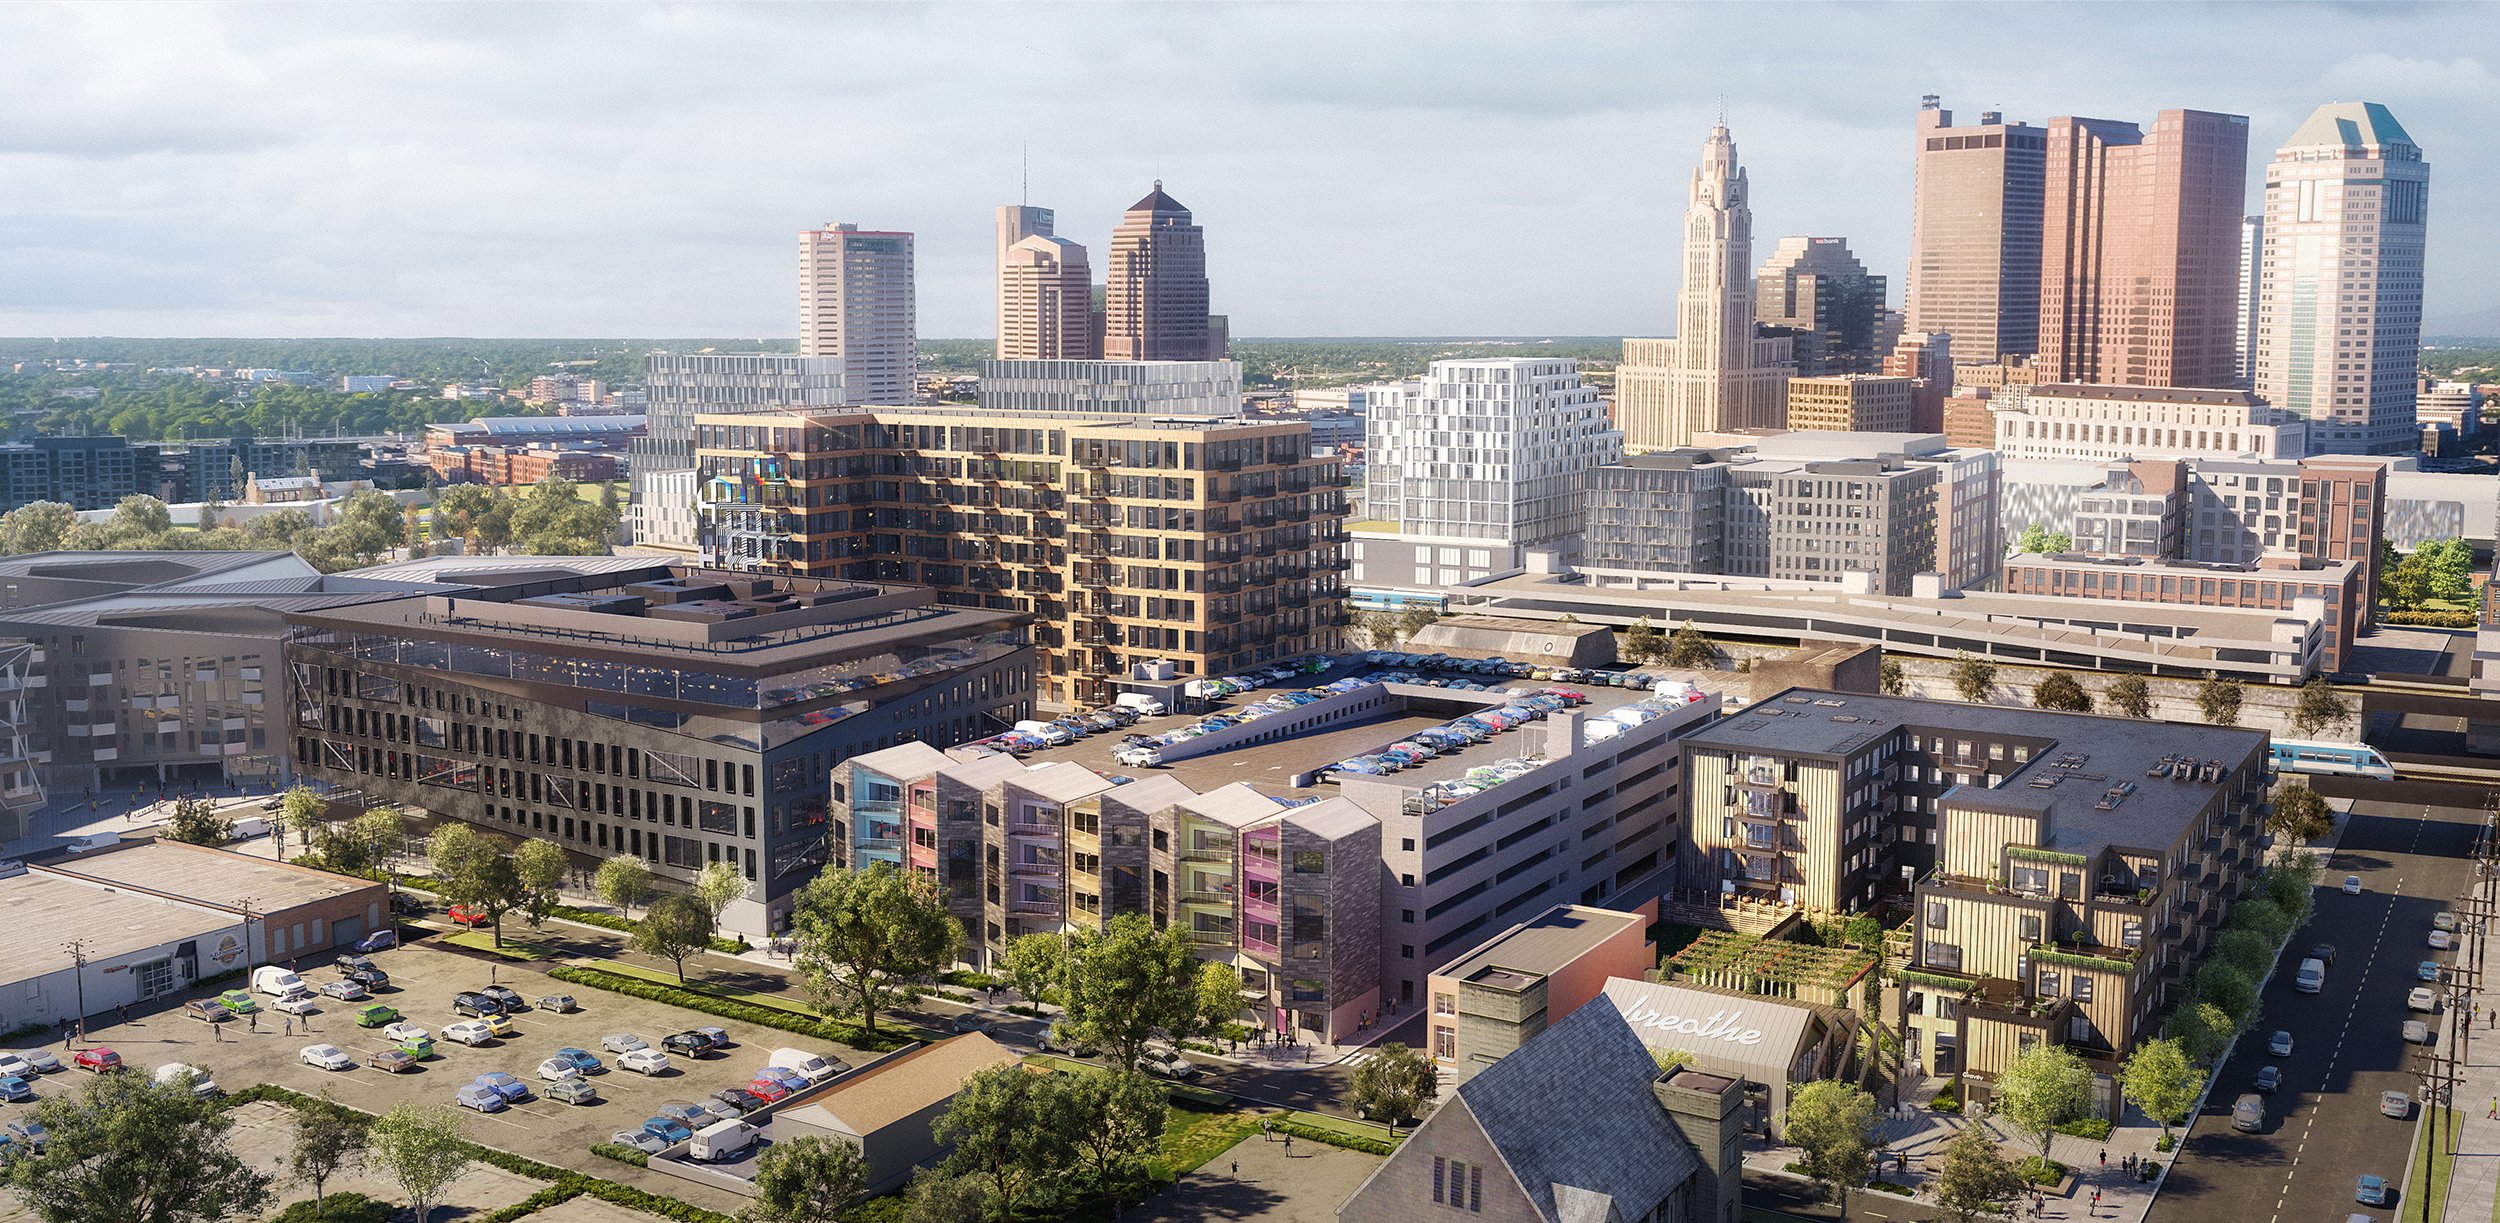 Gravity bringing more homes, offices, restaurants to Franklinton